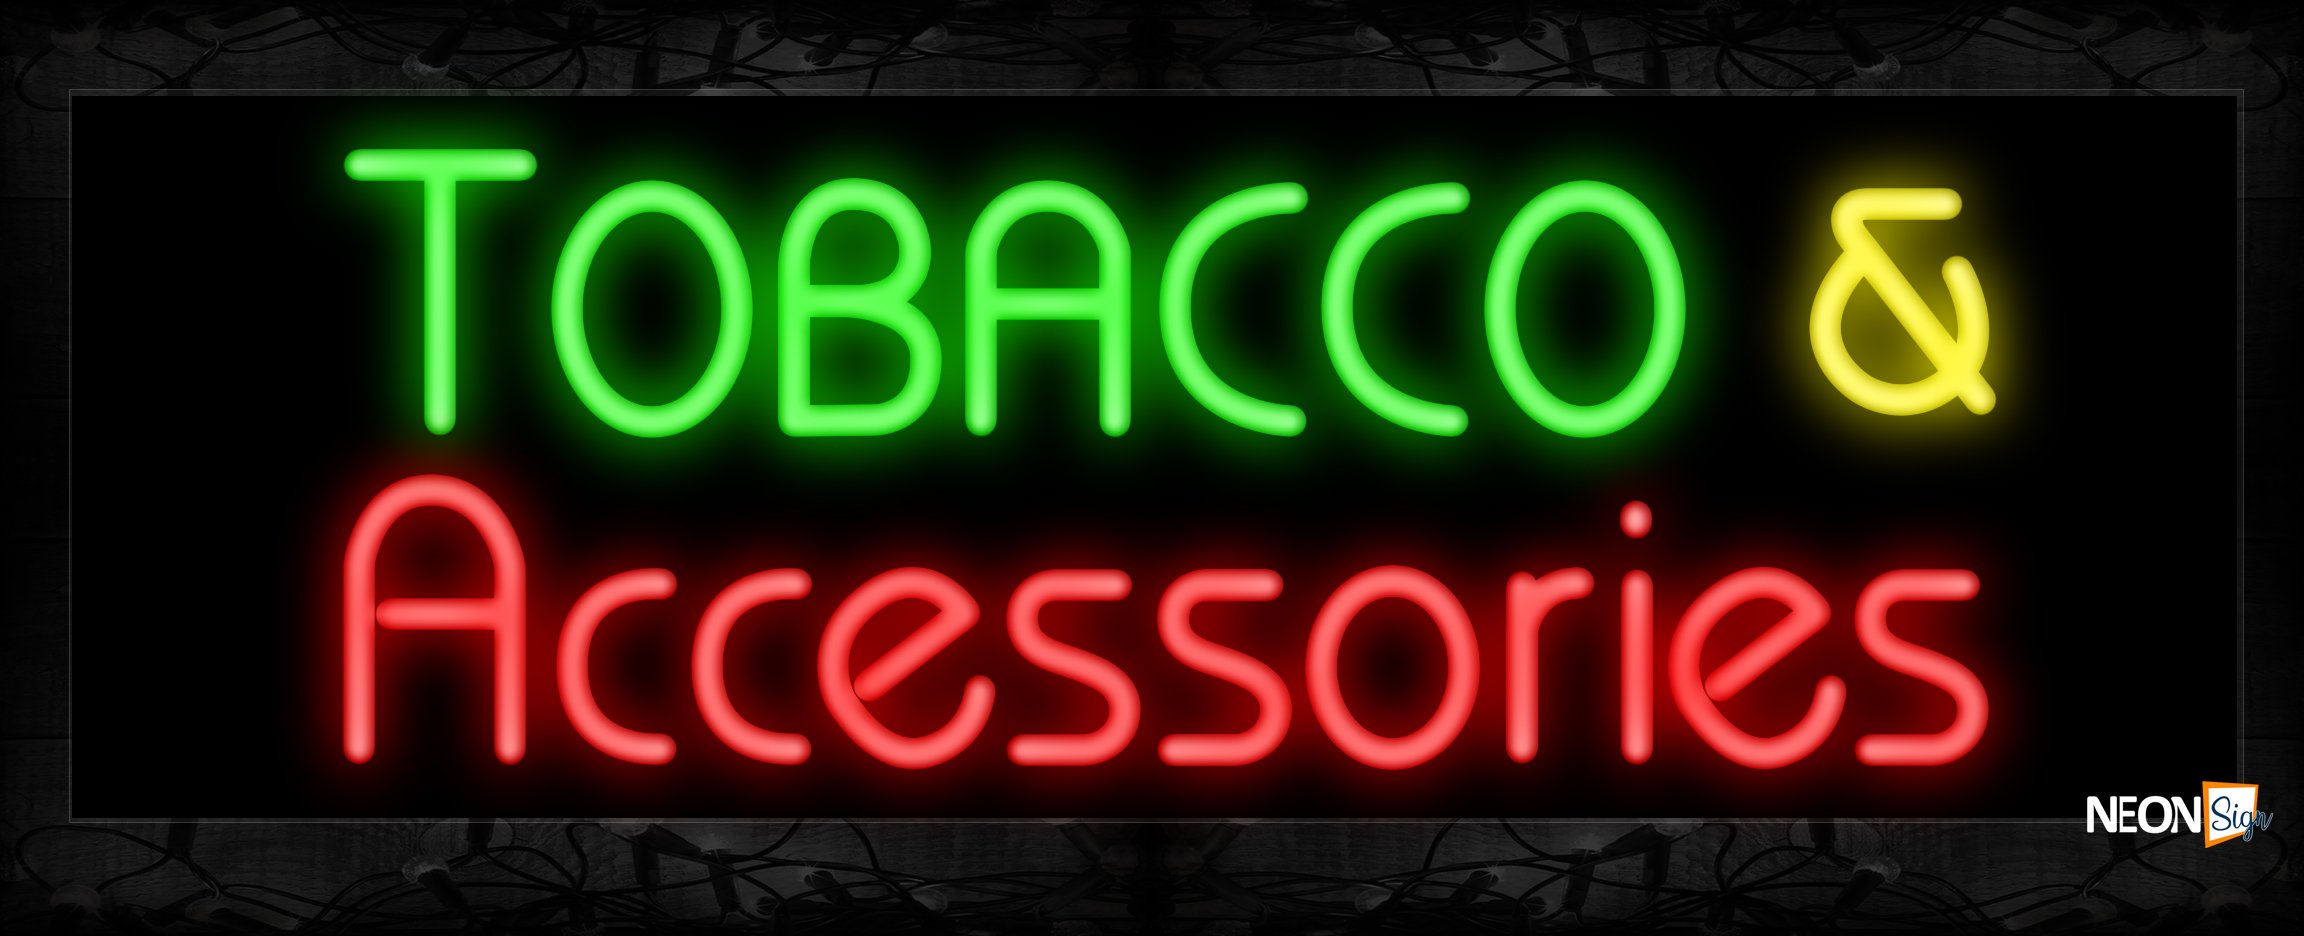 Image of 11227 Tobacco & Accessories Neon Sign 13x32 Black Backing